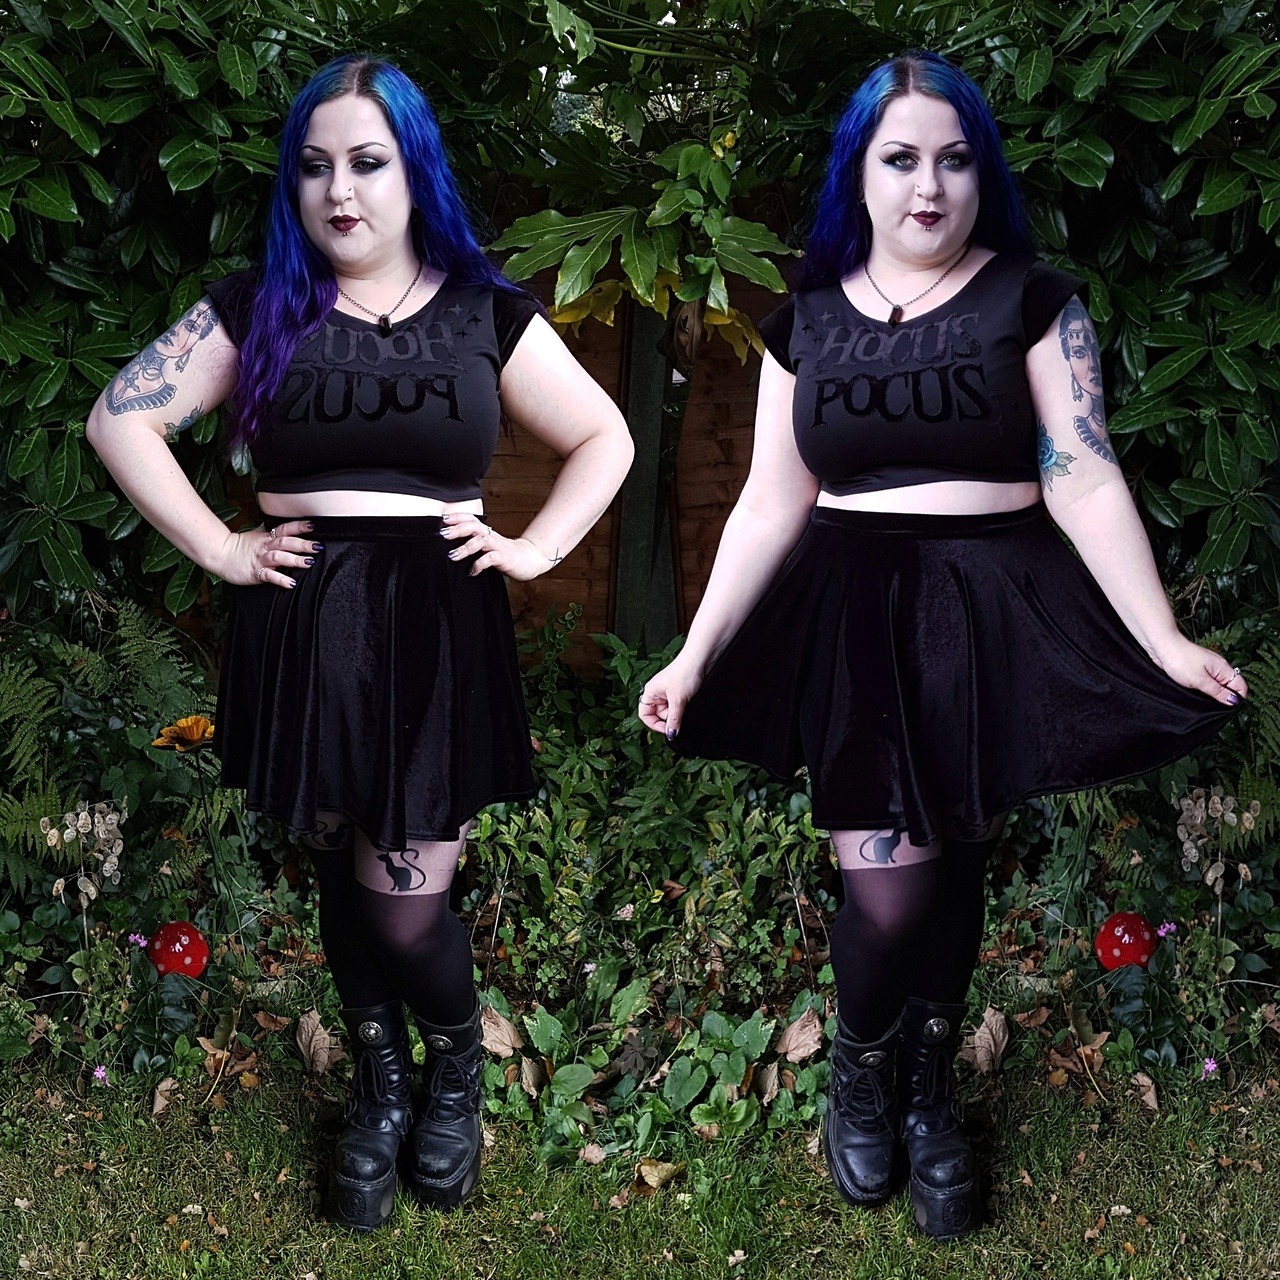 Heidi Grotesque - Some of my favourite recent outfits! All outfit...